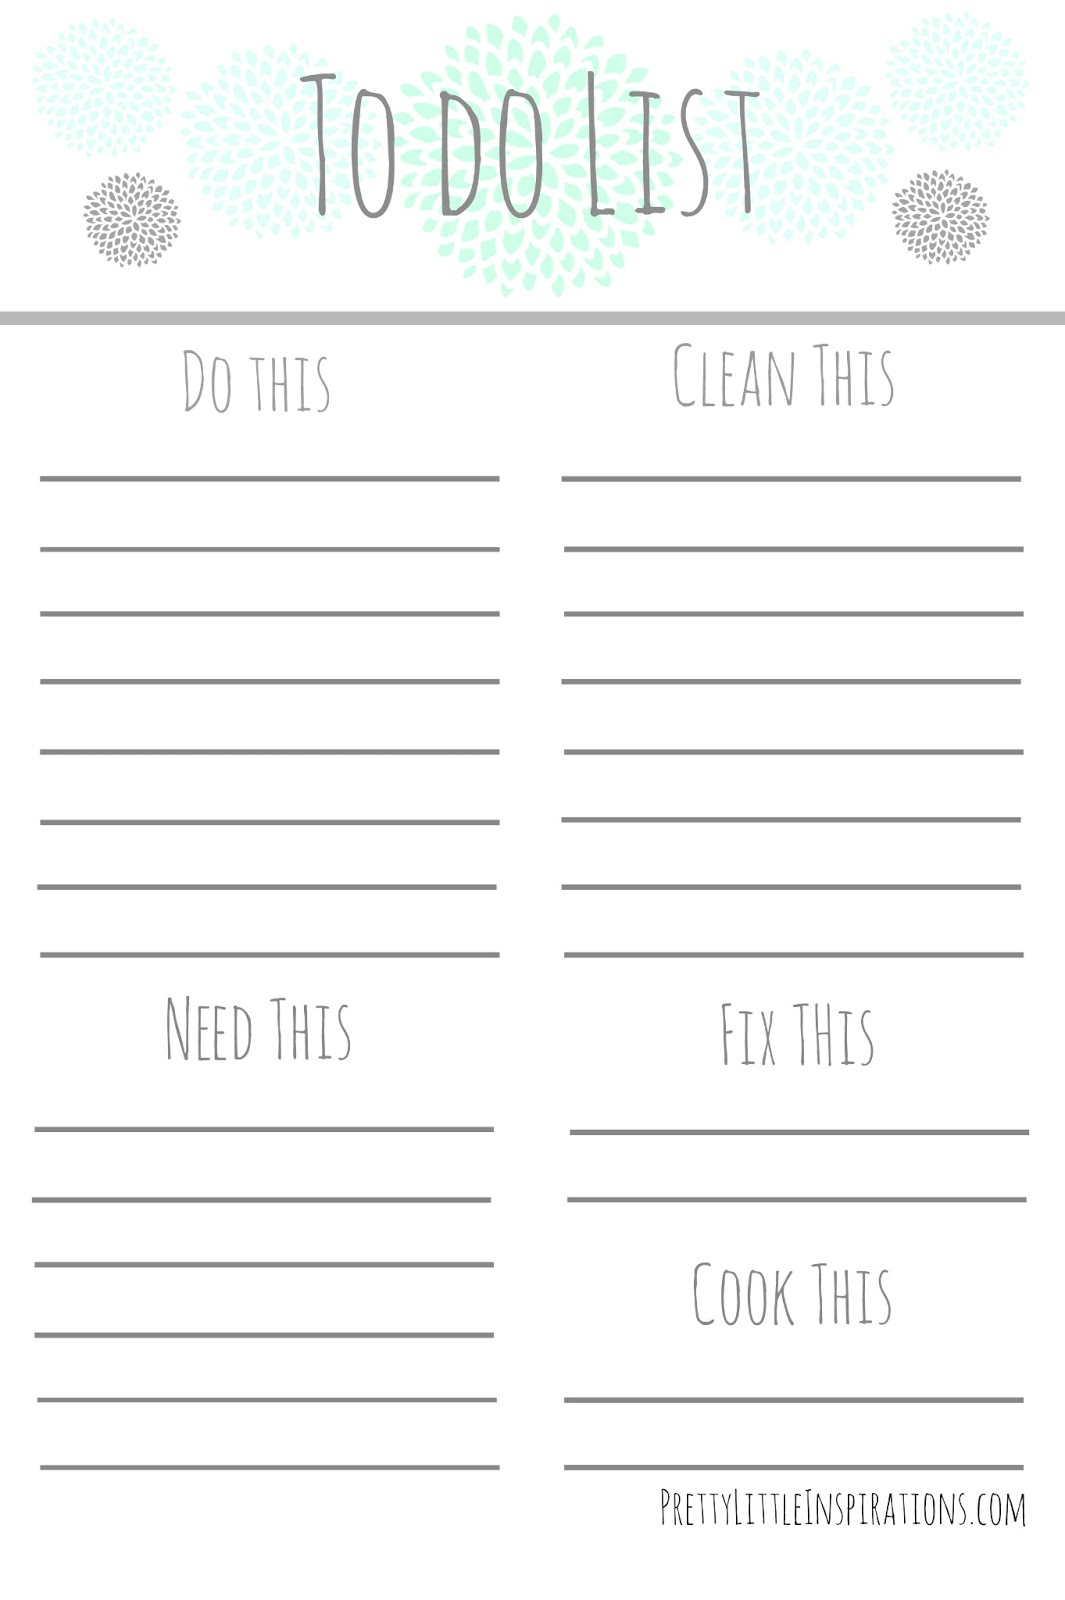 Pretty Little Inspirations: Free Printable To Do List